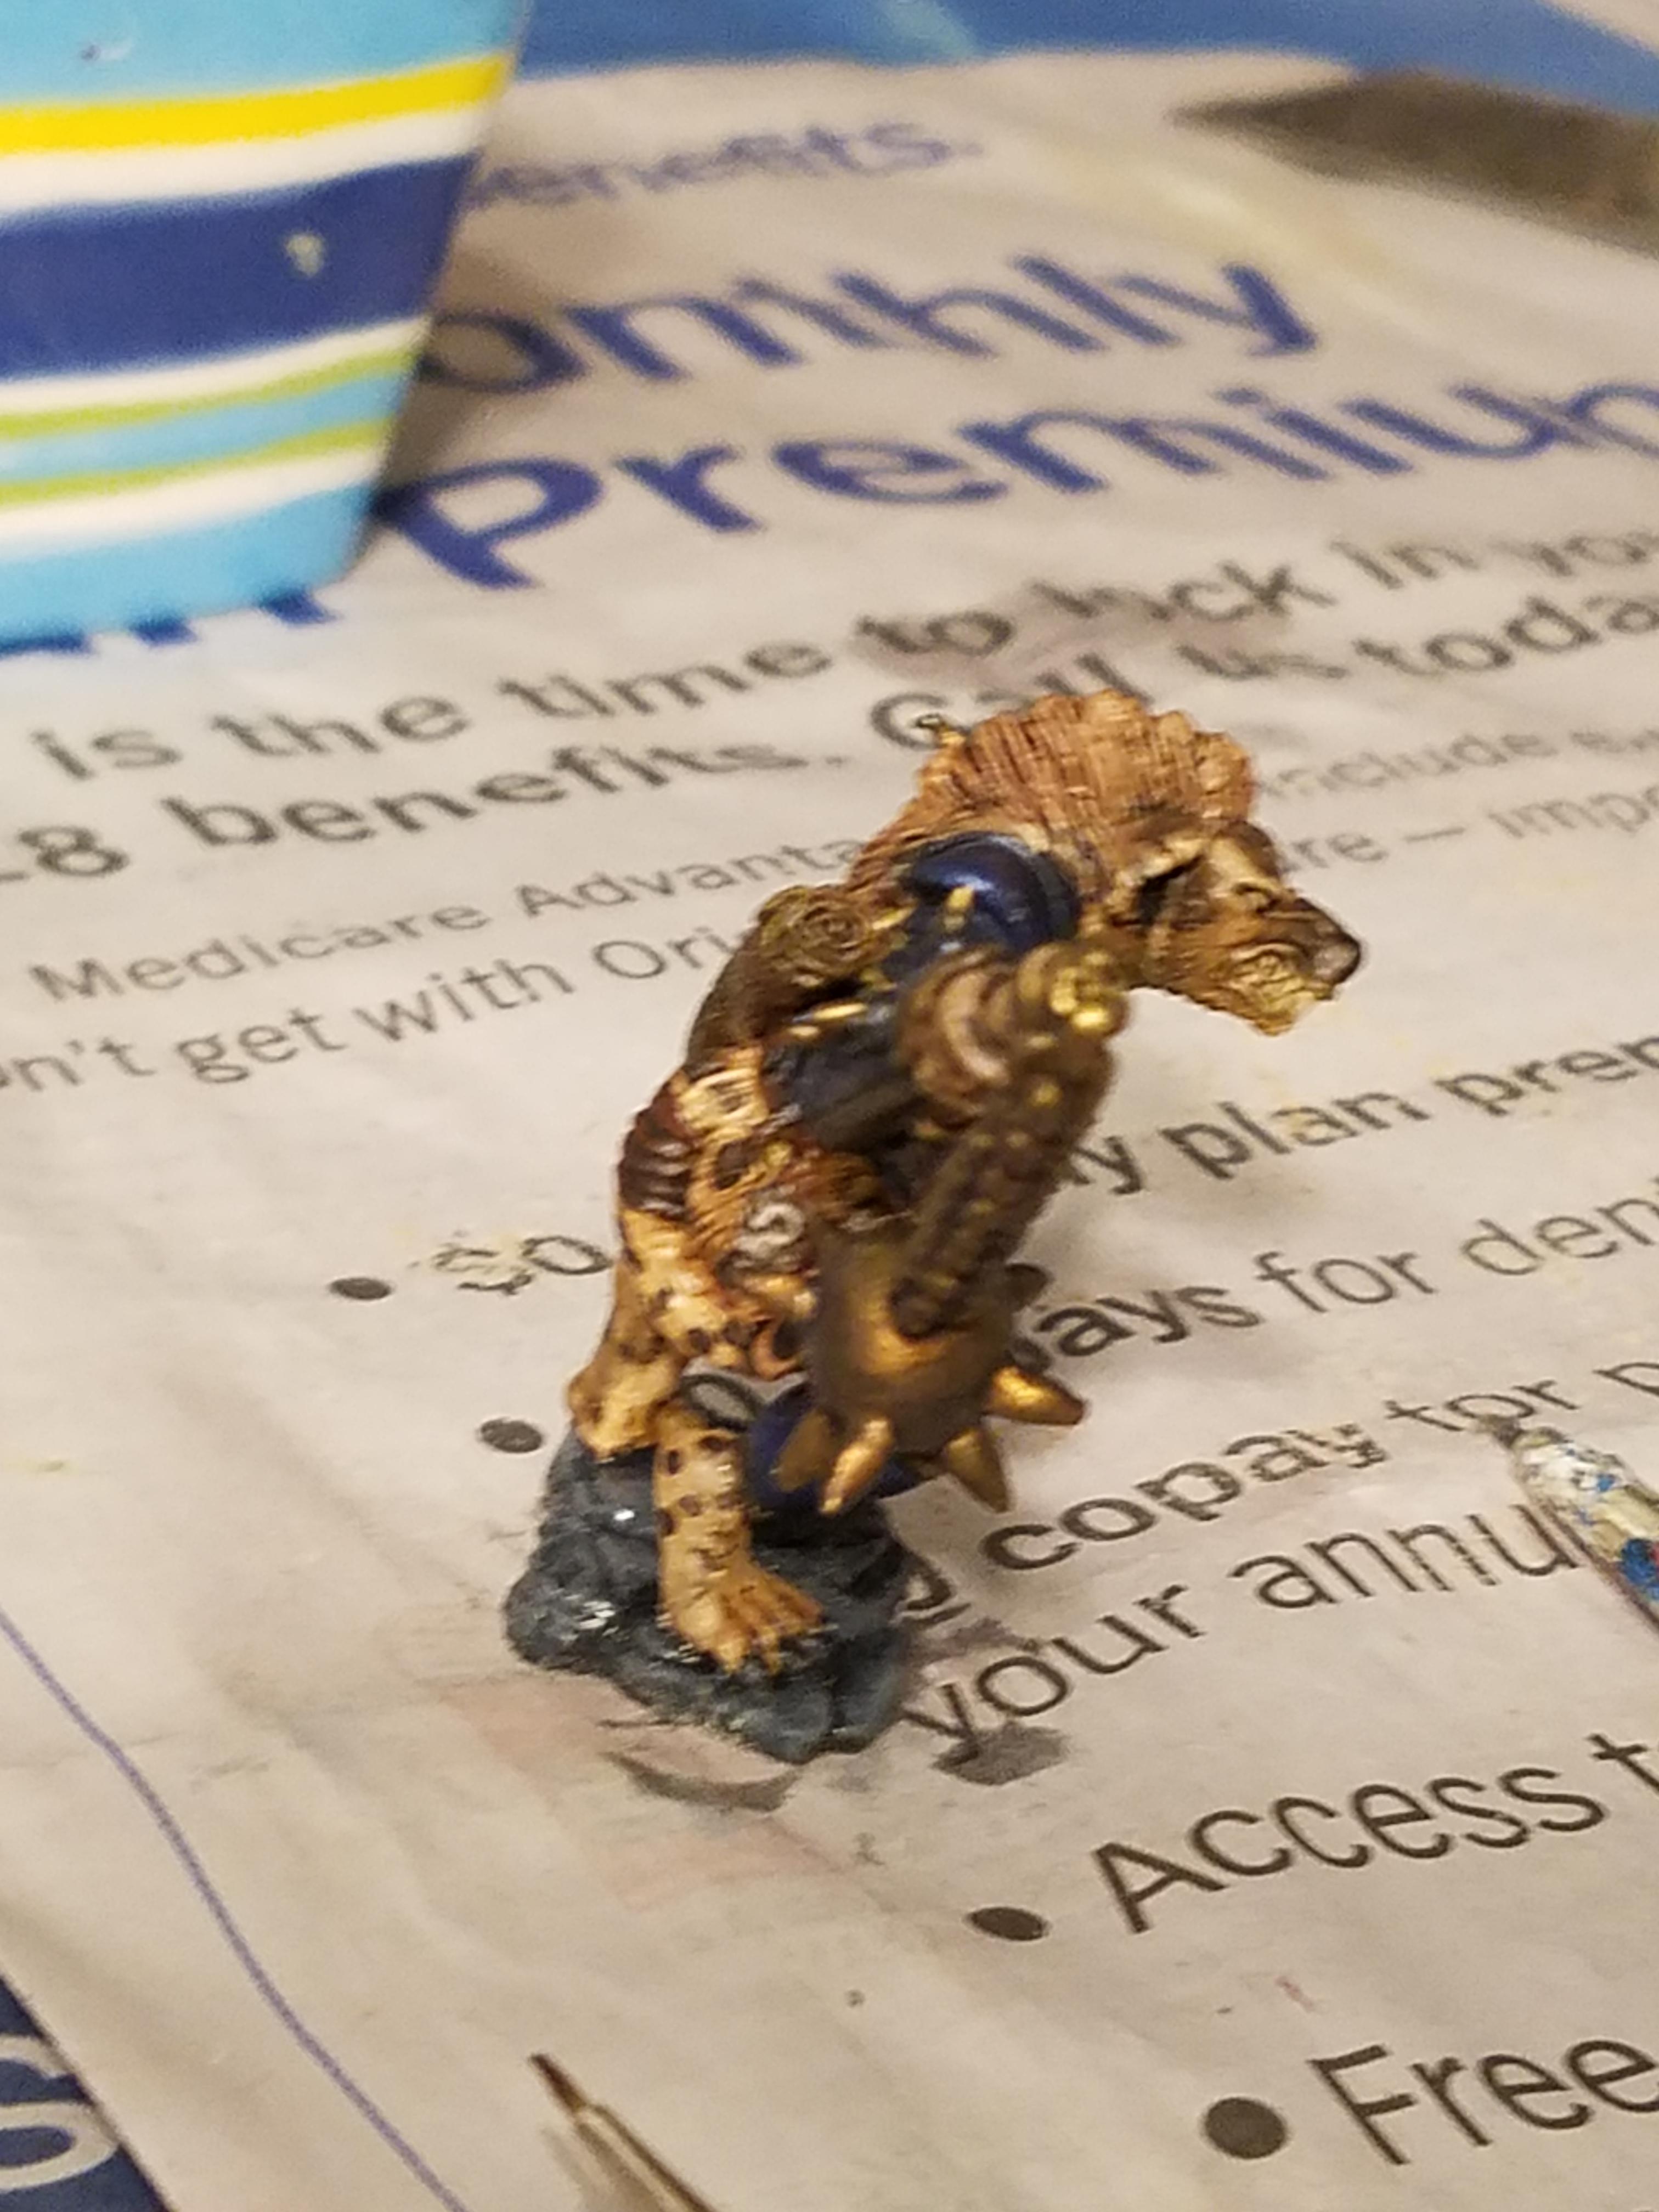 Blue Metallics, Cauliflower Base, Colored Metallics, Gnoll, Hyena, Layered Wash Painting, Mediocrity, Overly Busy Backgrounds, Oversized Flail, Reaper, Stone Themed Base, True Metallic Metals